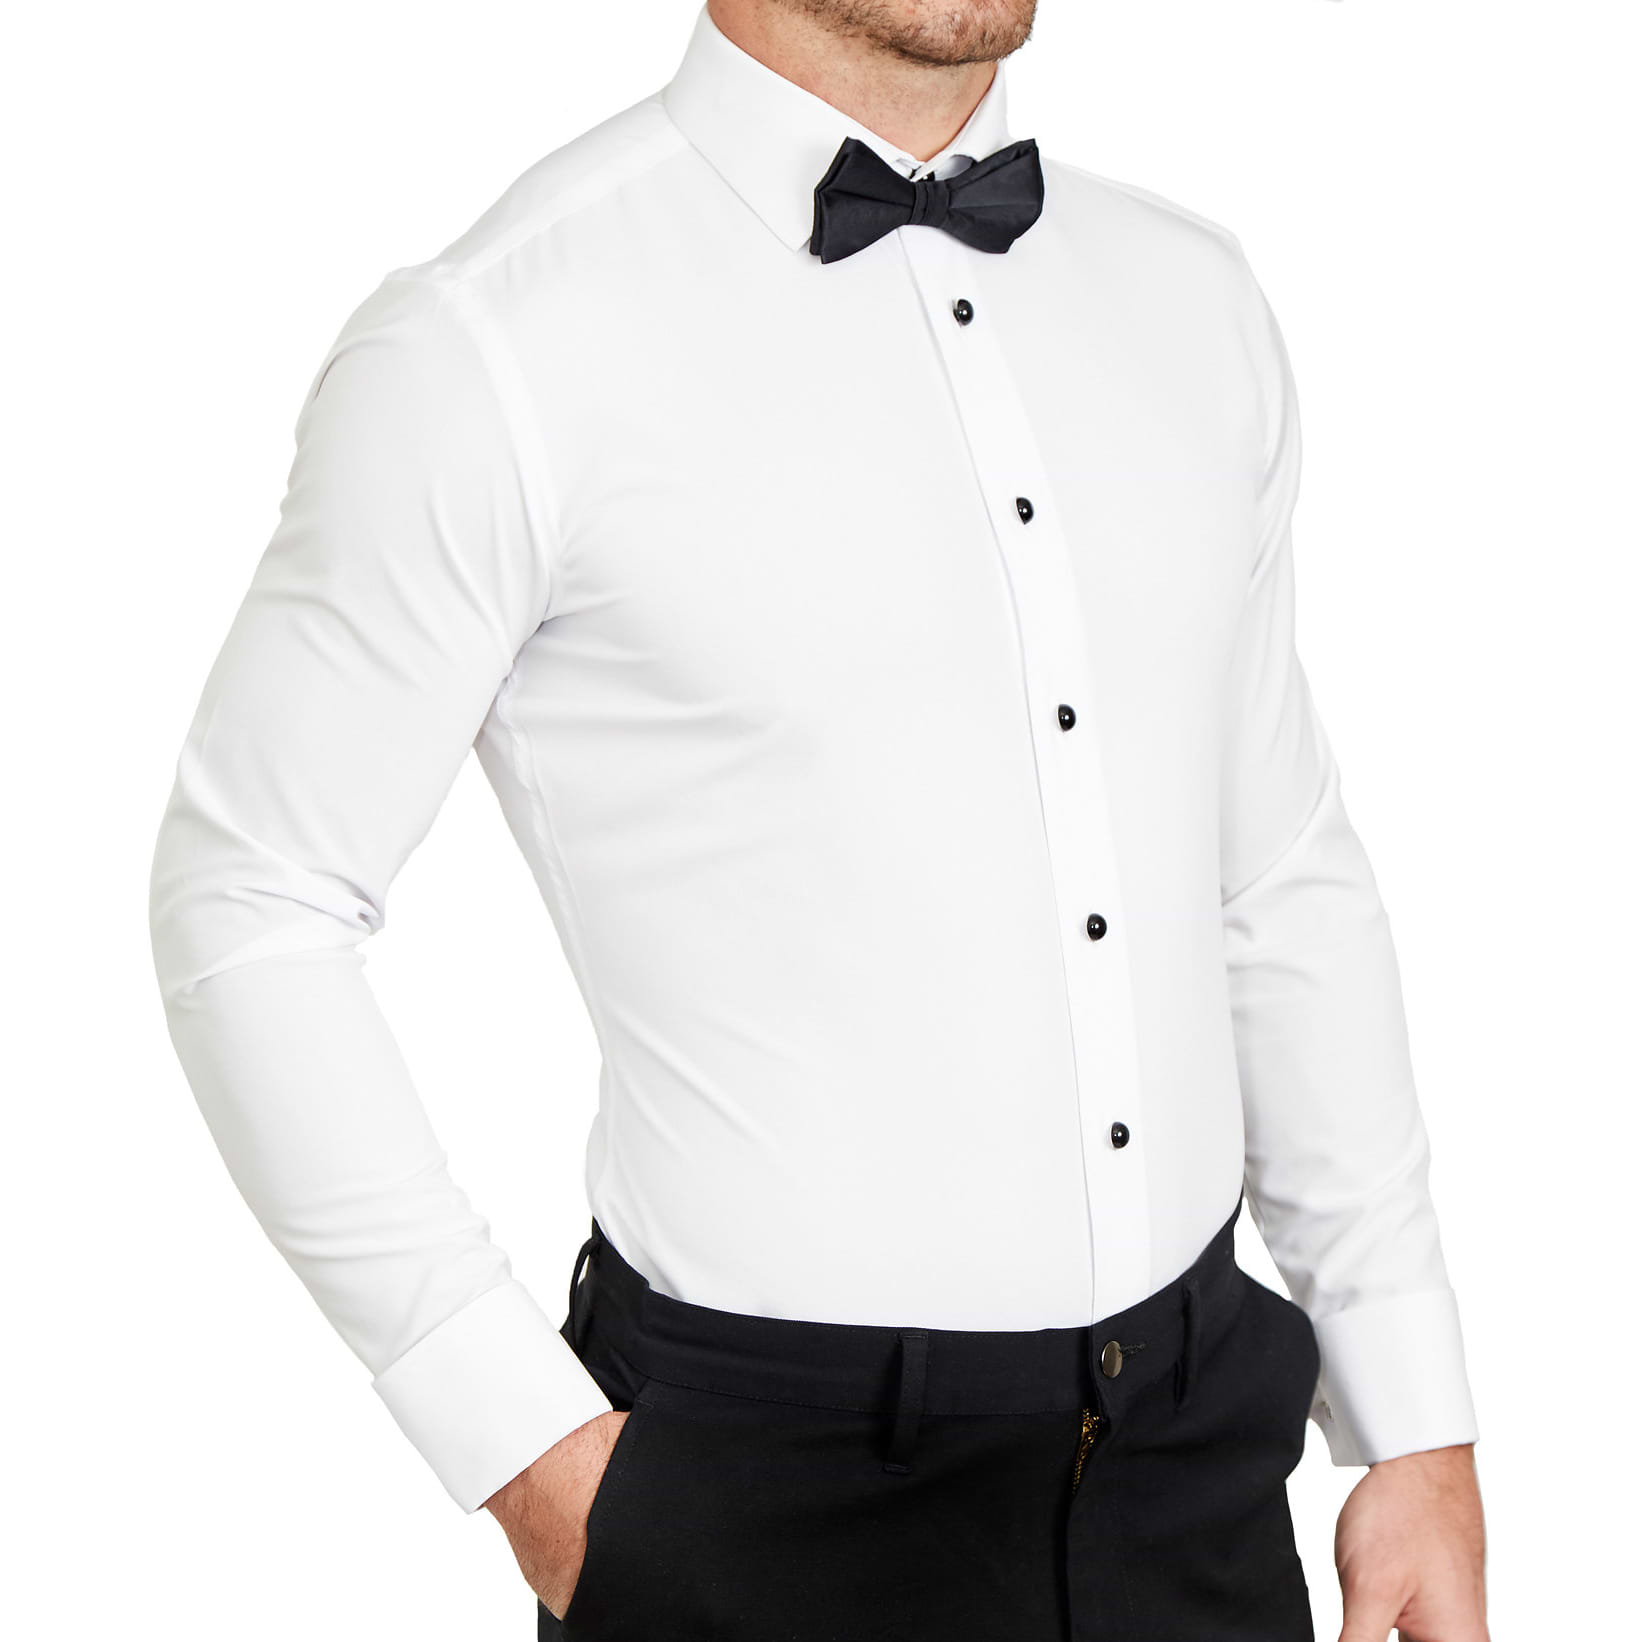 The Solid White Tuxedo Shirt - Classic Fit